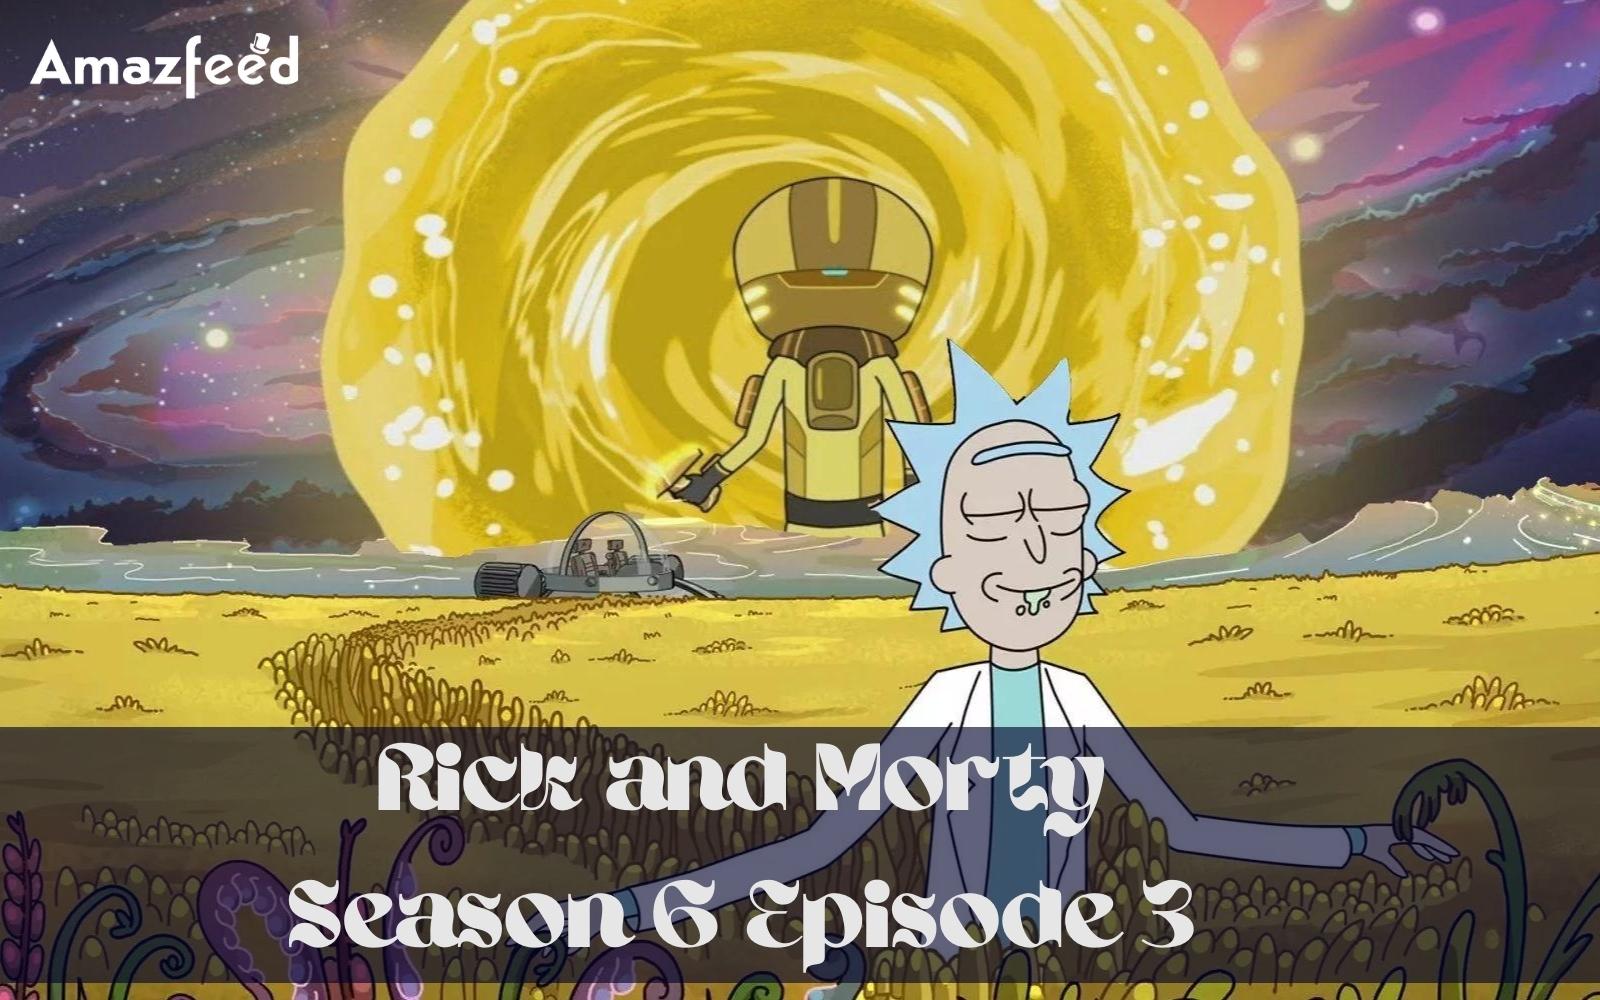 Rick and Morty Season 6 Episode 3 ⇒ Countdown, Release Date, Spoilers, Recap, Cast & News Updates